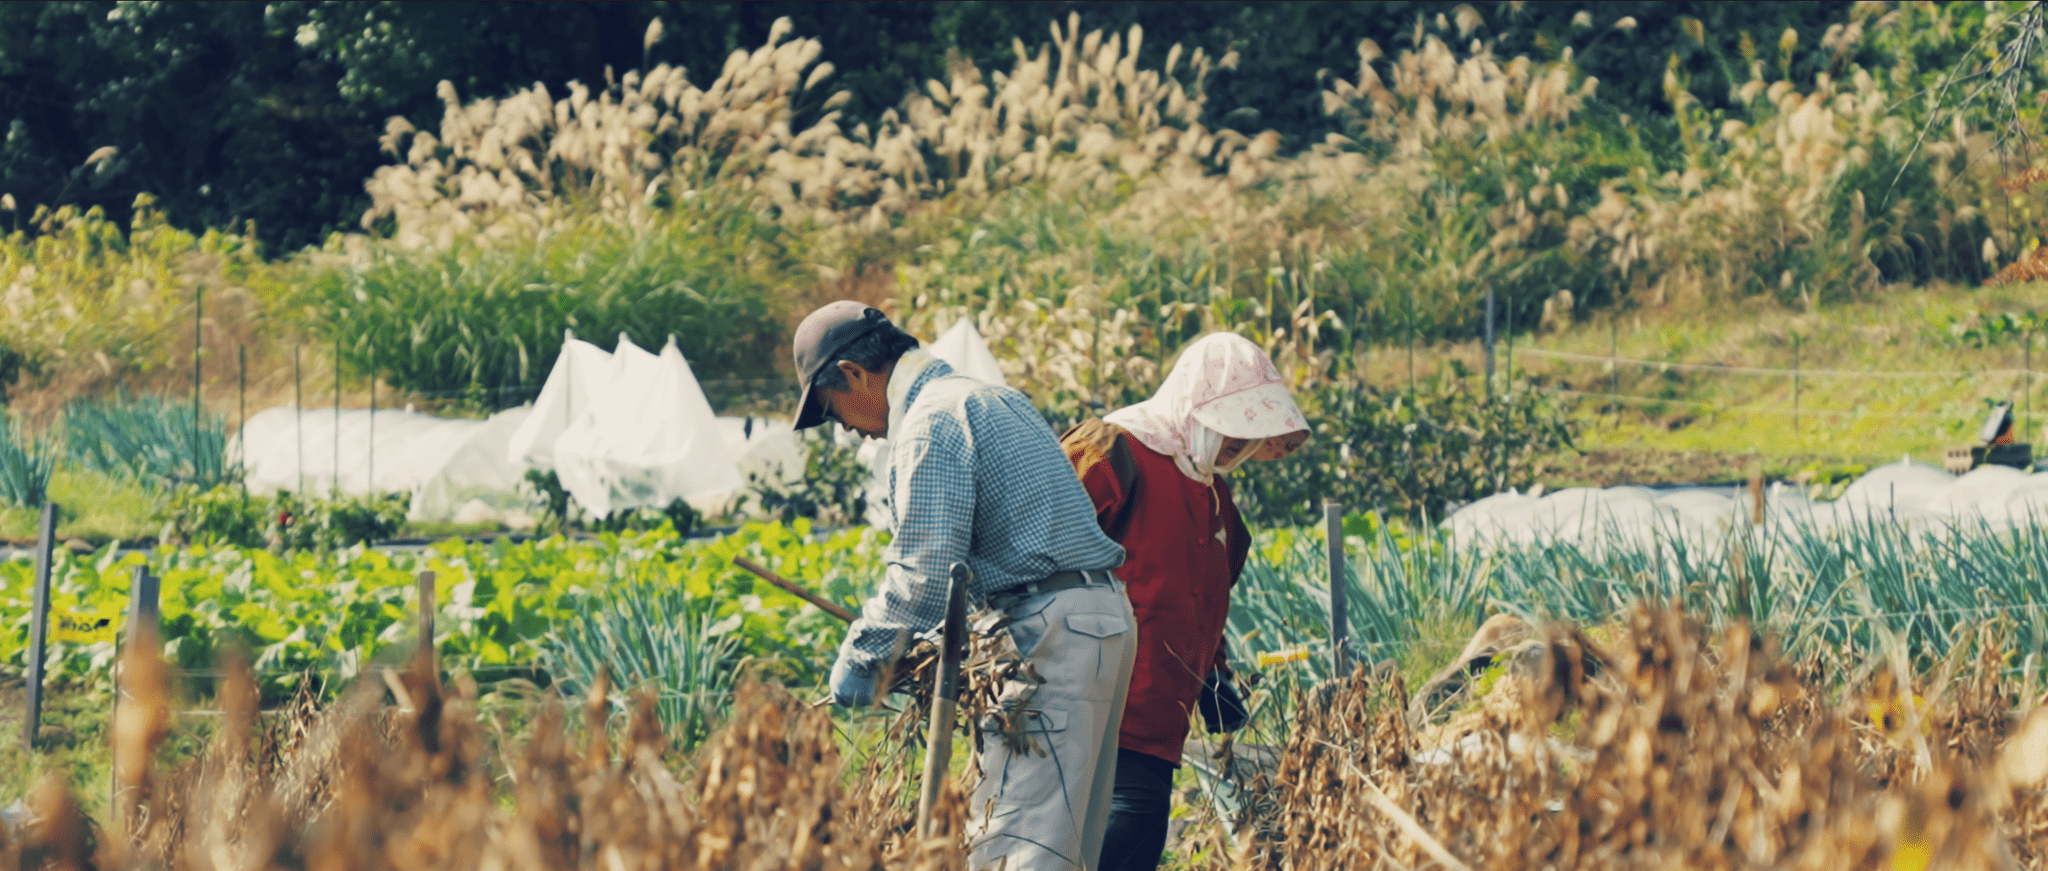 An elderly couple harvesting soybeans to make miso